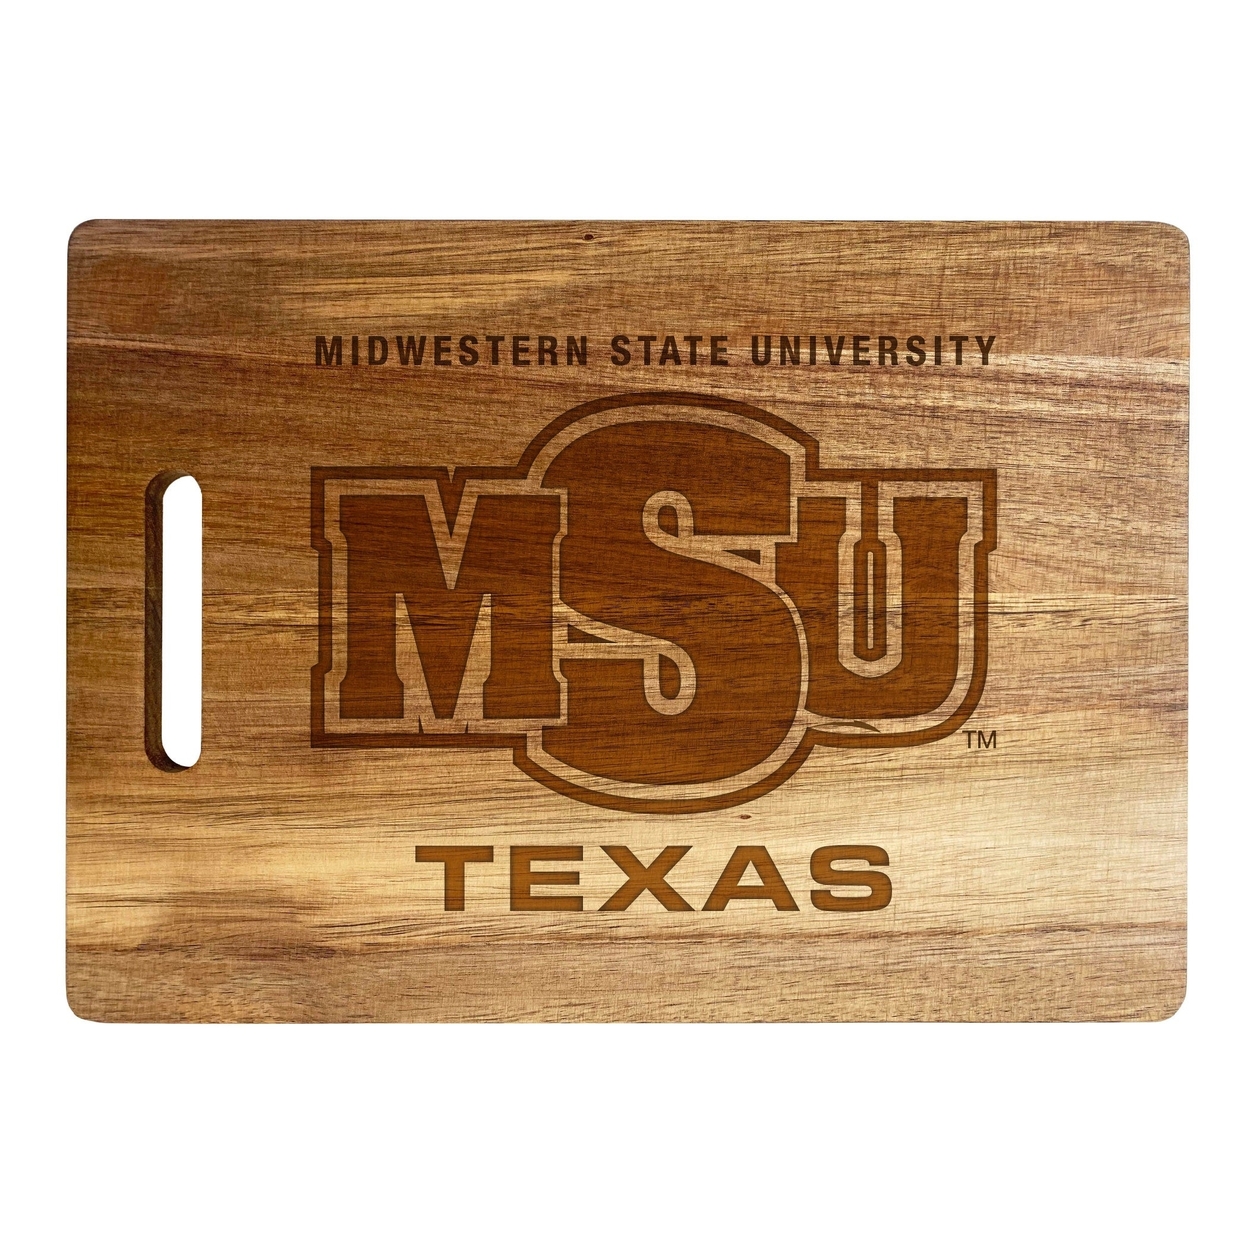 Midwestern State University Engraved Wooden Cutting Board 10 X 14 Acacia Wood - Large Engraving